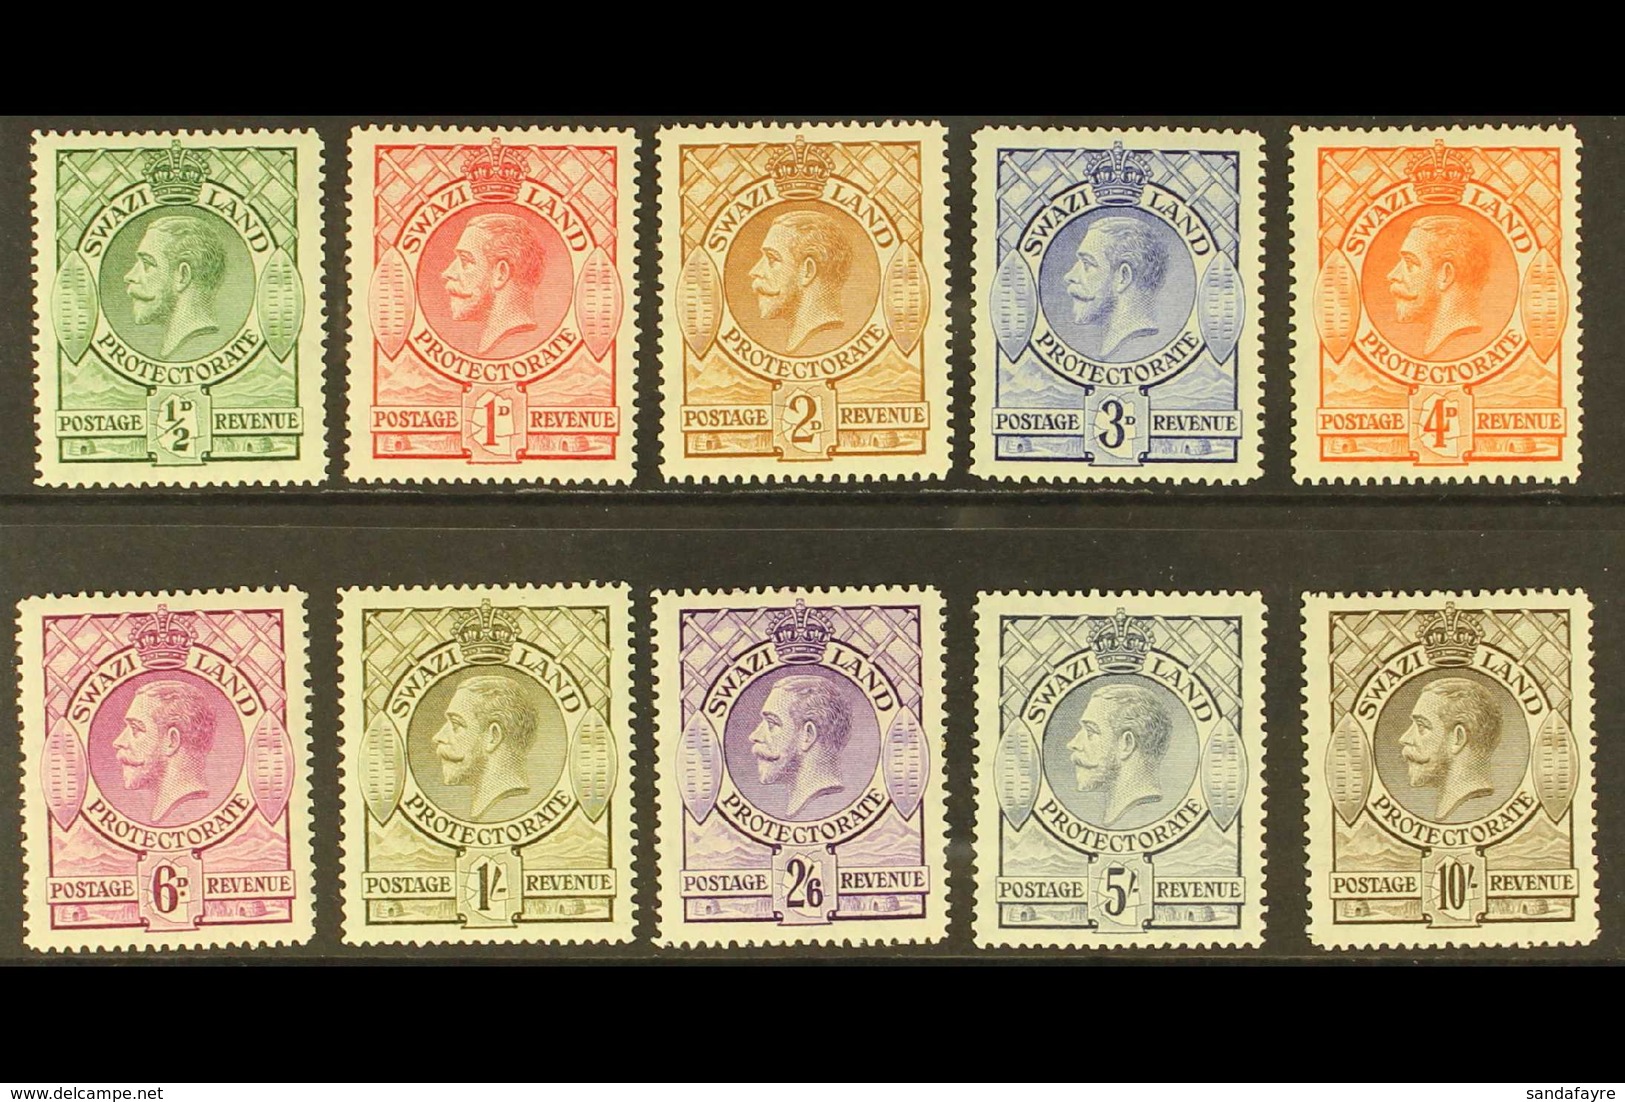 1933 KGV Portrait Complete Set, SG 11/20, Fine Mint With Expertizing Marks To Rear (10 Stamps) For More Images, Please V - Swaziland (...-1967)